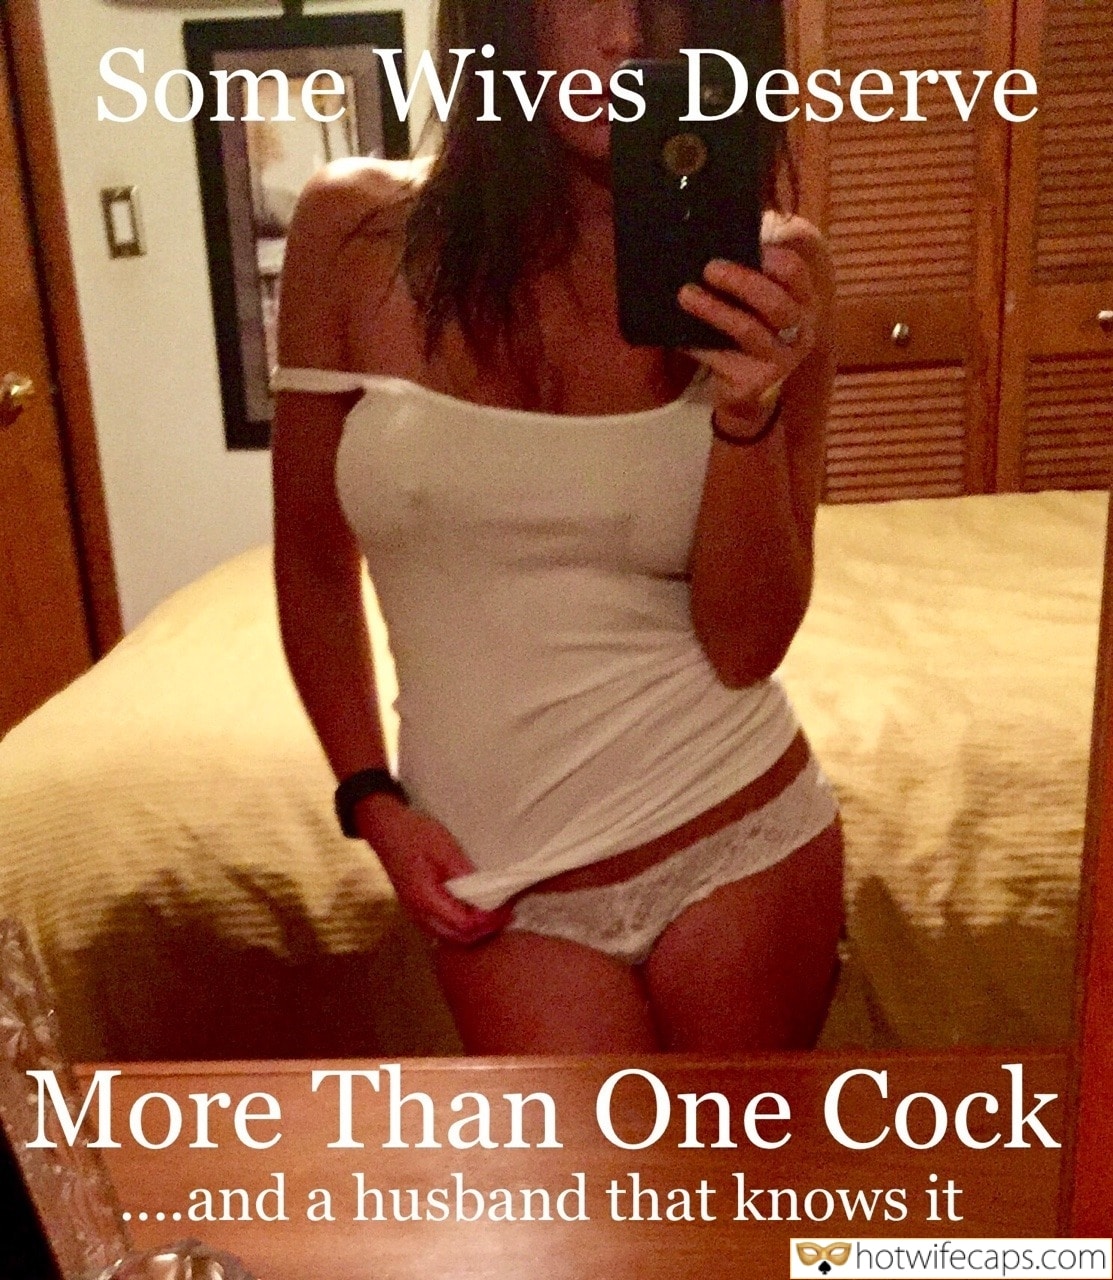 wifesharing hotwife cuckold pussy licking cheating captions hotwife caption beautiful hot wife takes naked selfies